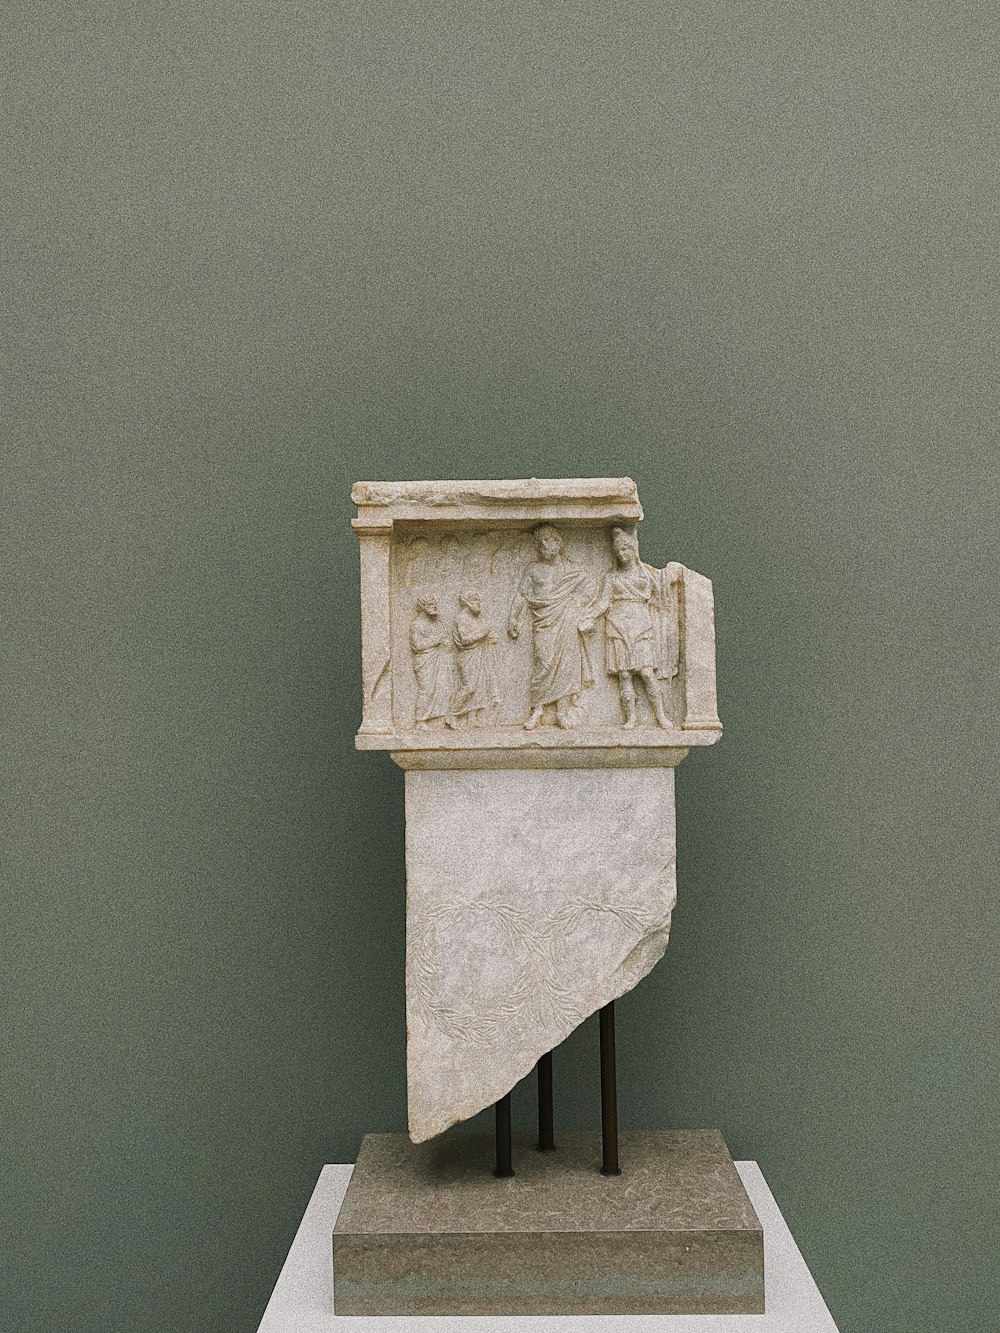 a sculpture of a rectangle with figures on it